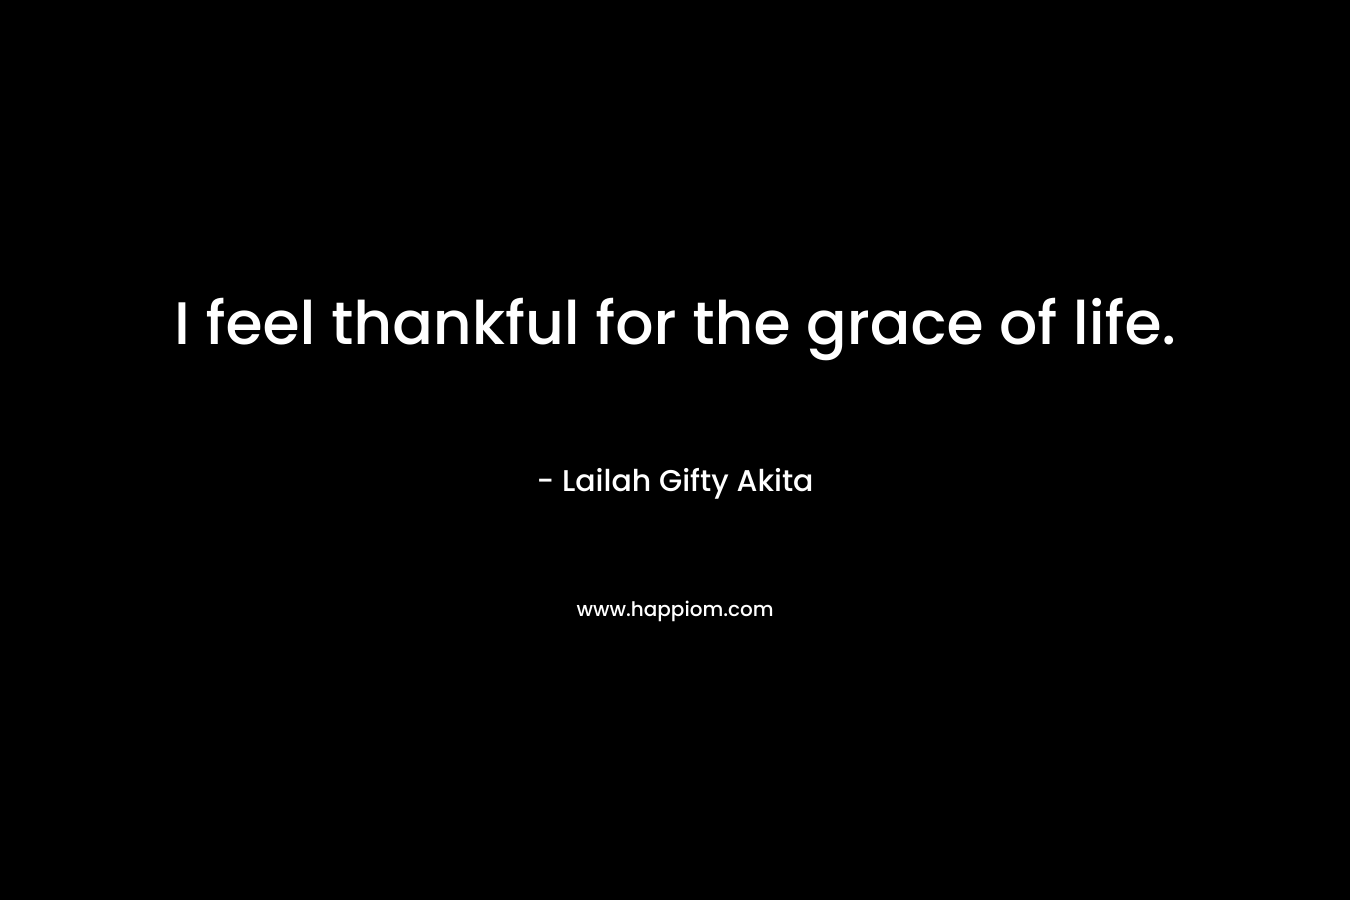 I feel thankful for the grace of life.